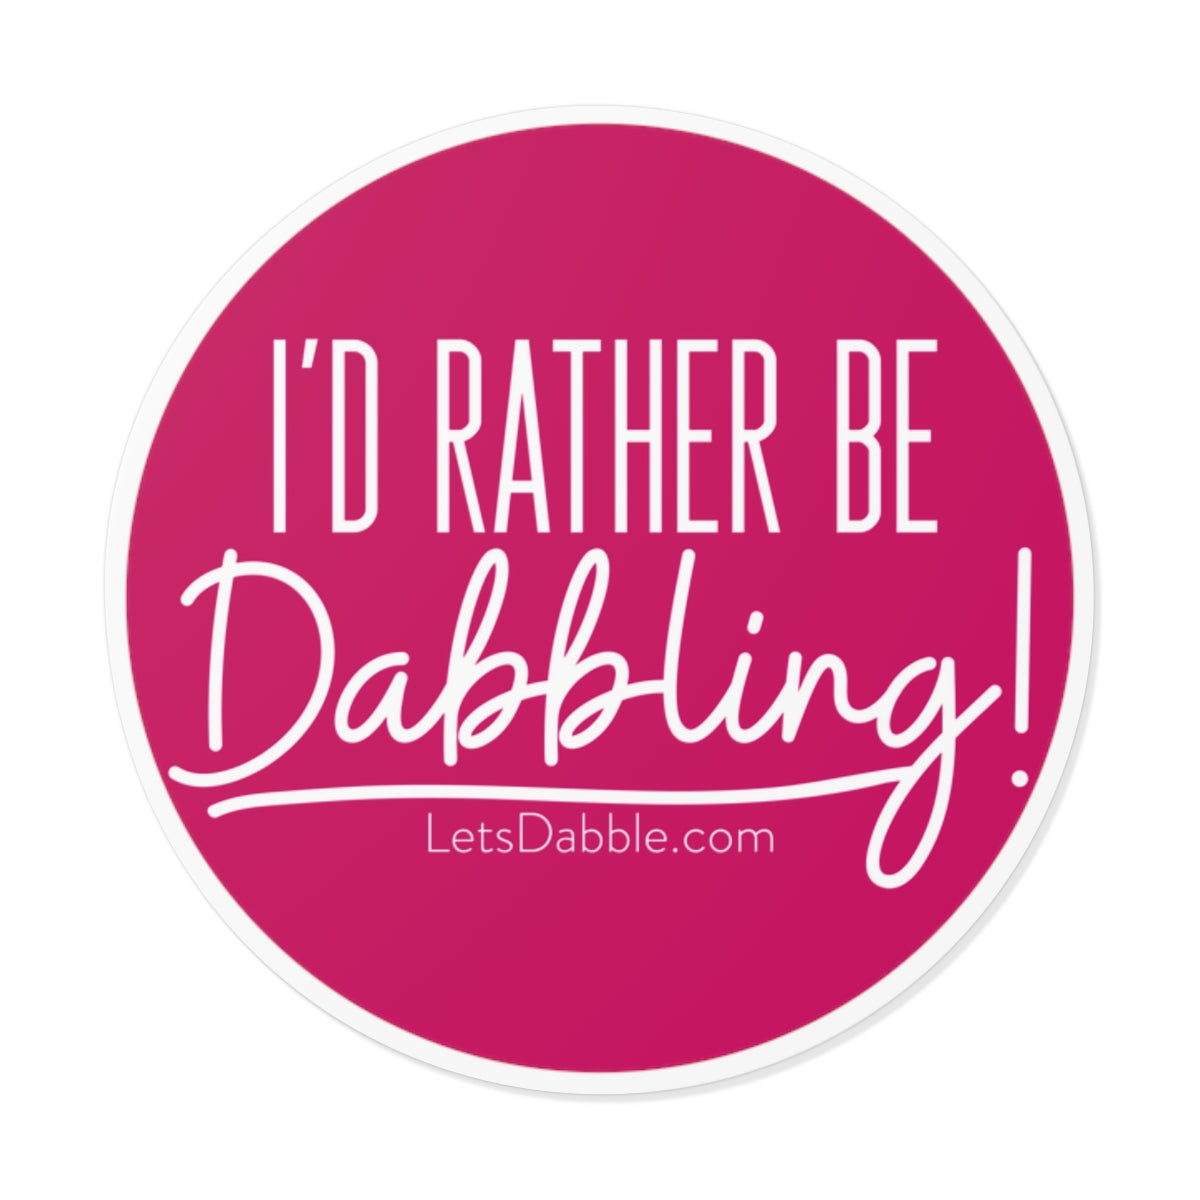 I'd rather be Dabbling round sticker